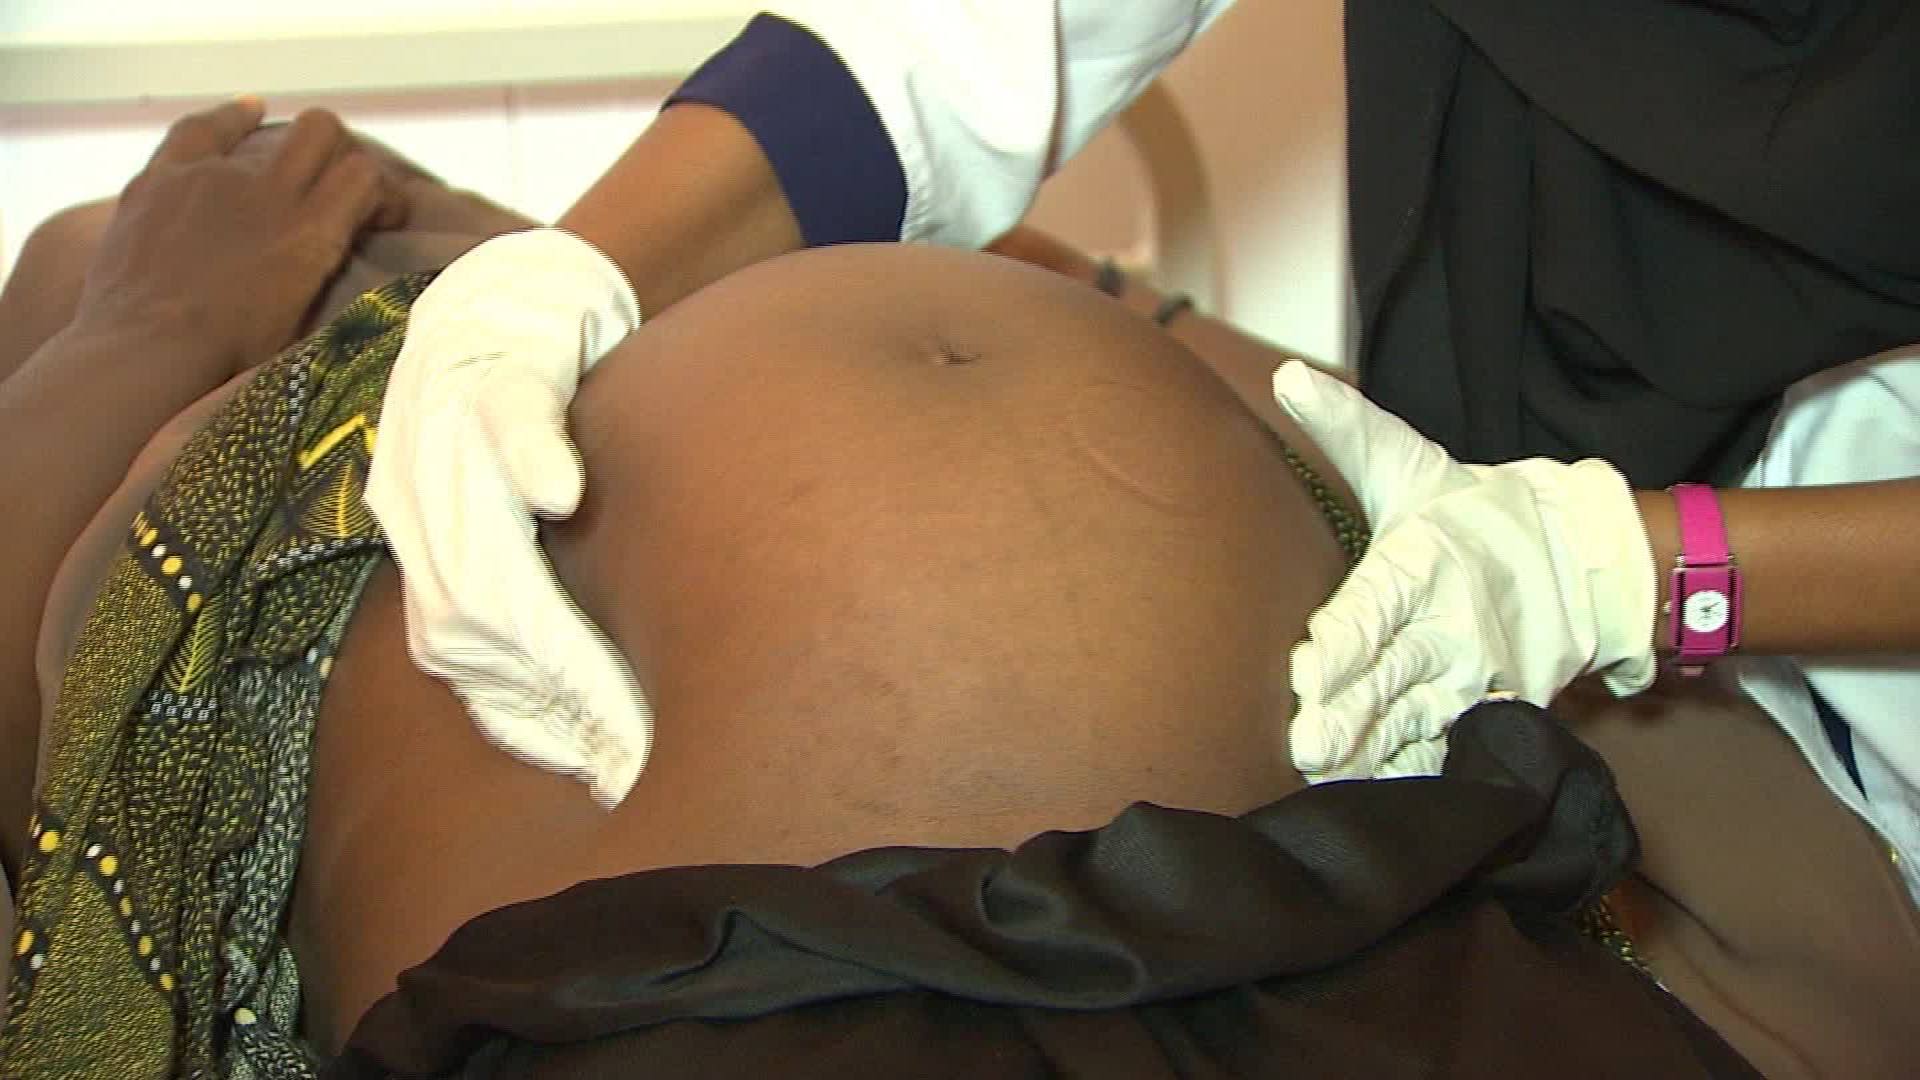 Is this the most dangerous place to give birth?